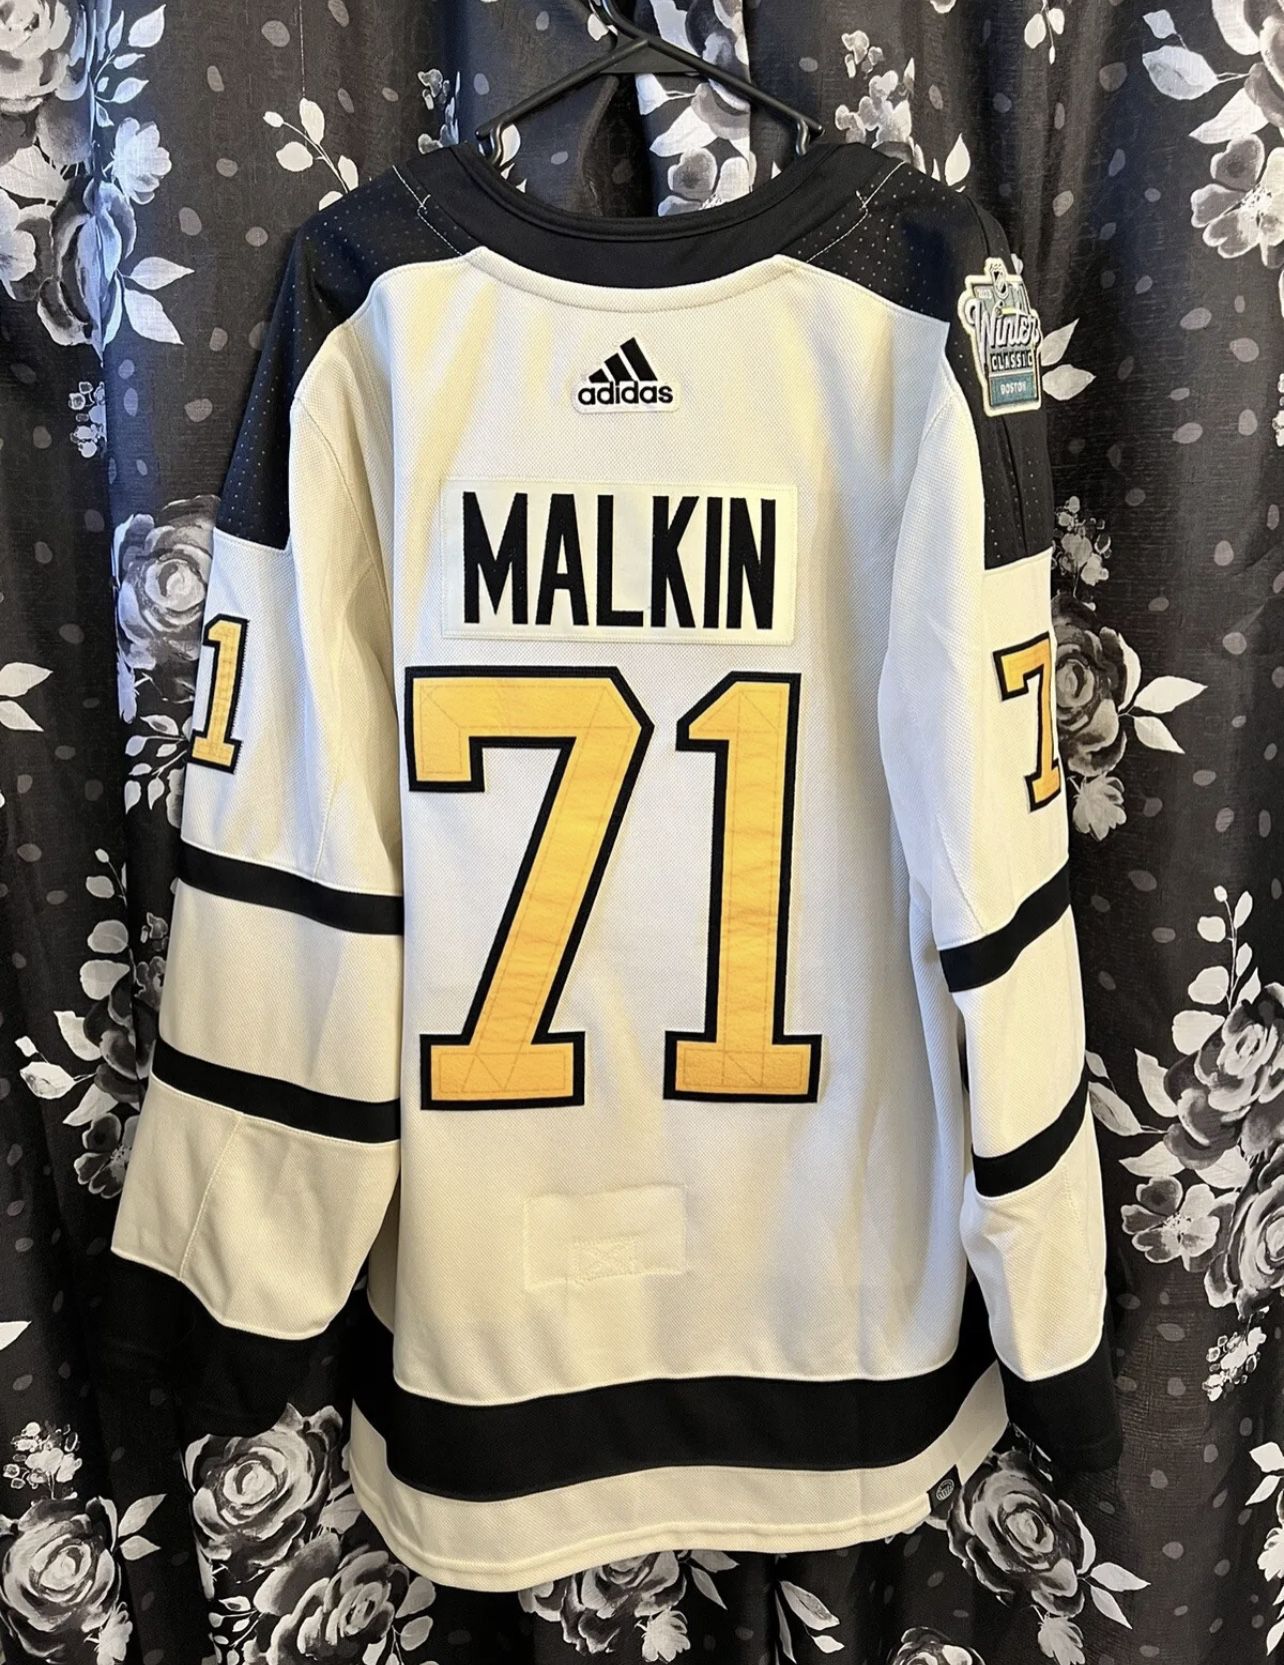 Definitely You on Twitter: If Malkin scores a goal tonight… Take $71 off  the regular price of the new penguins adidas jersey tomorrow (Malkin only)…  In store only, one day only…  /